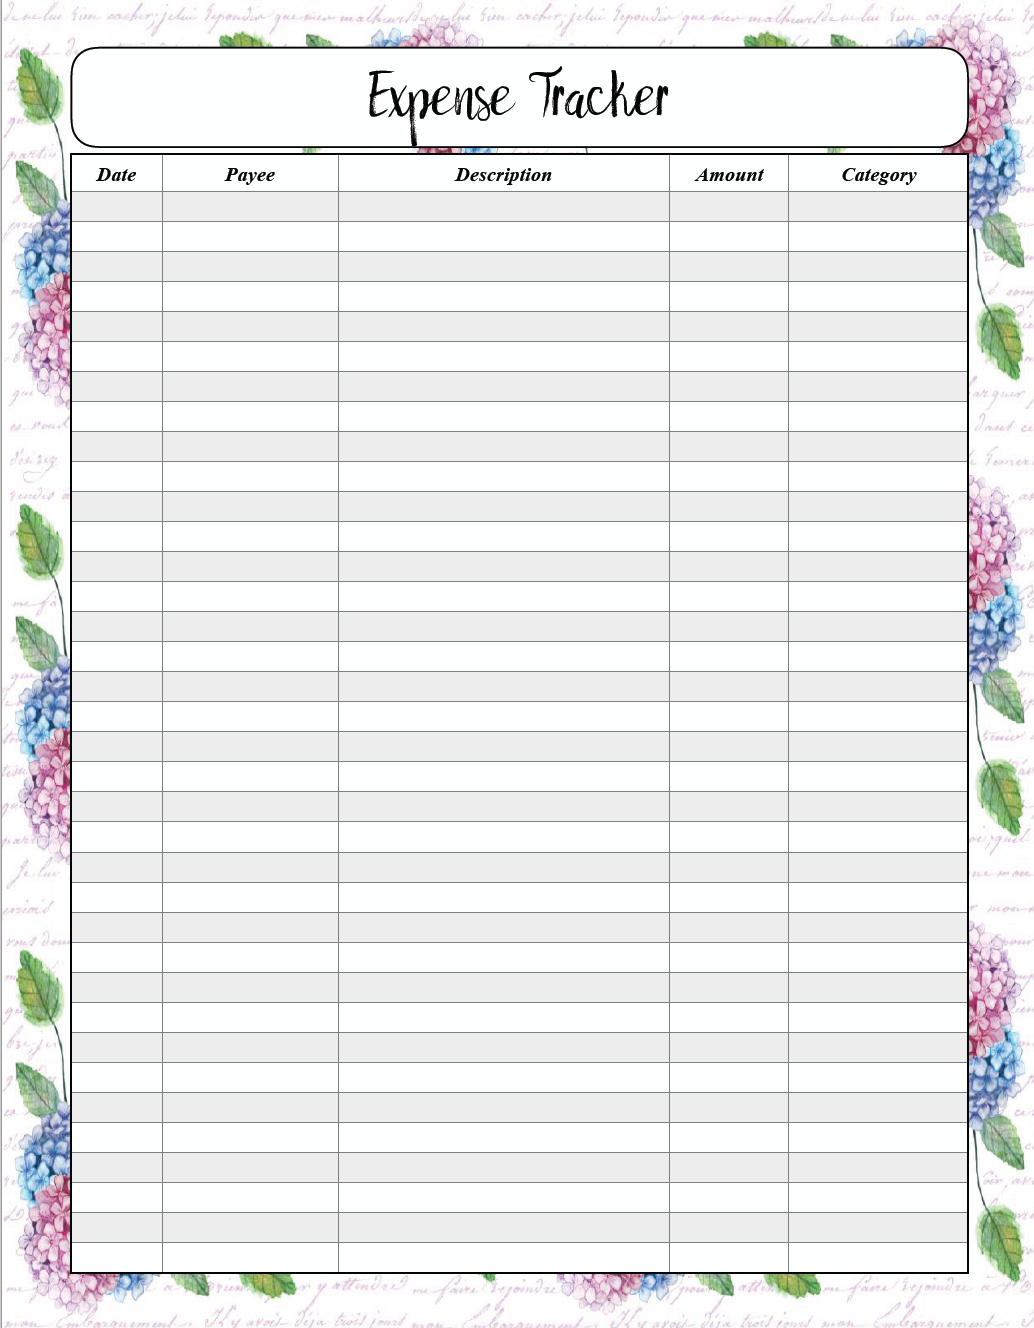 excel budget and expense tracker